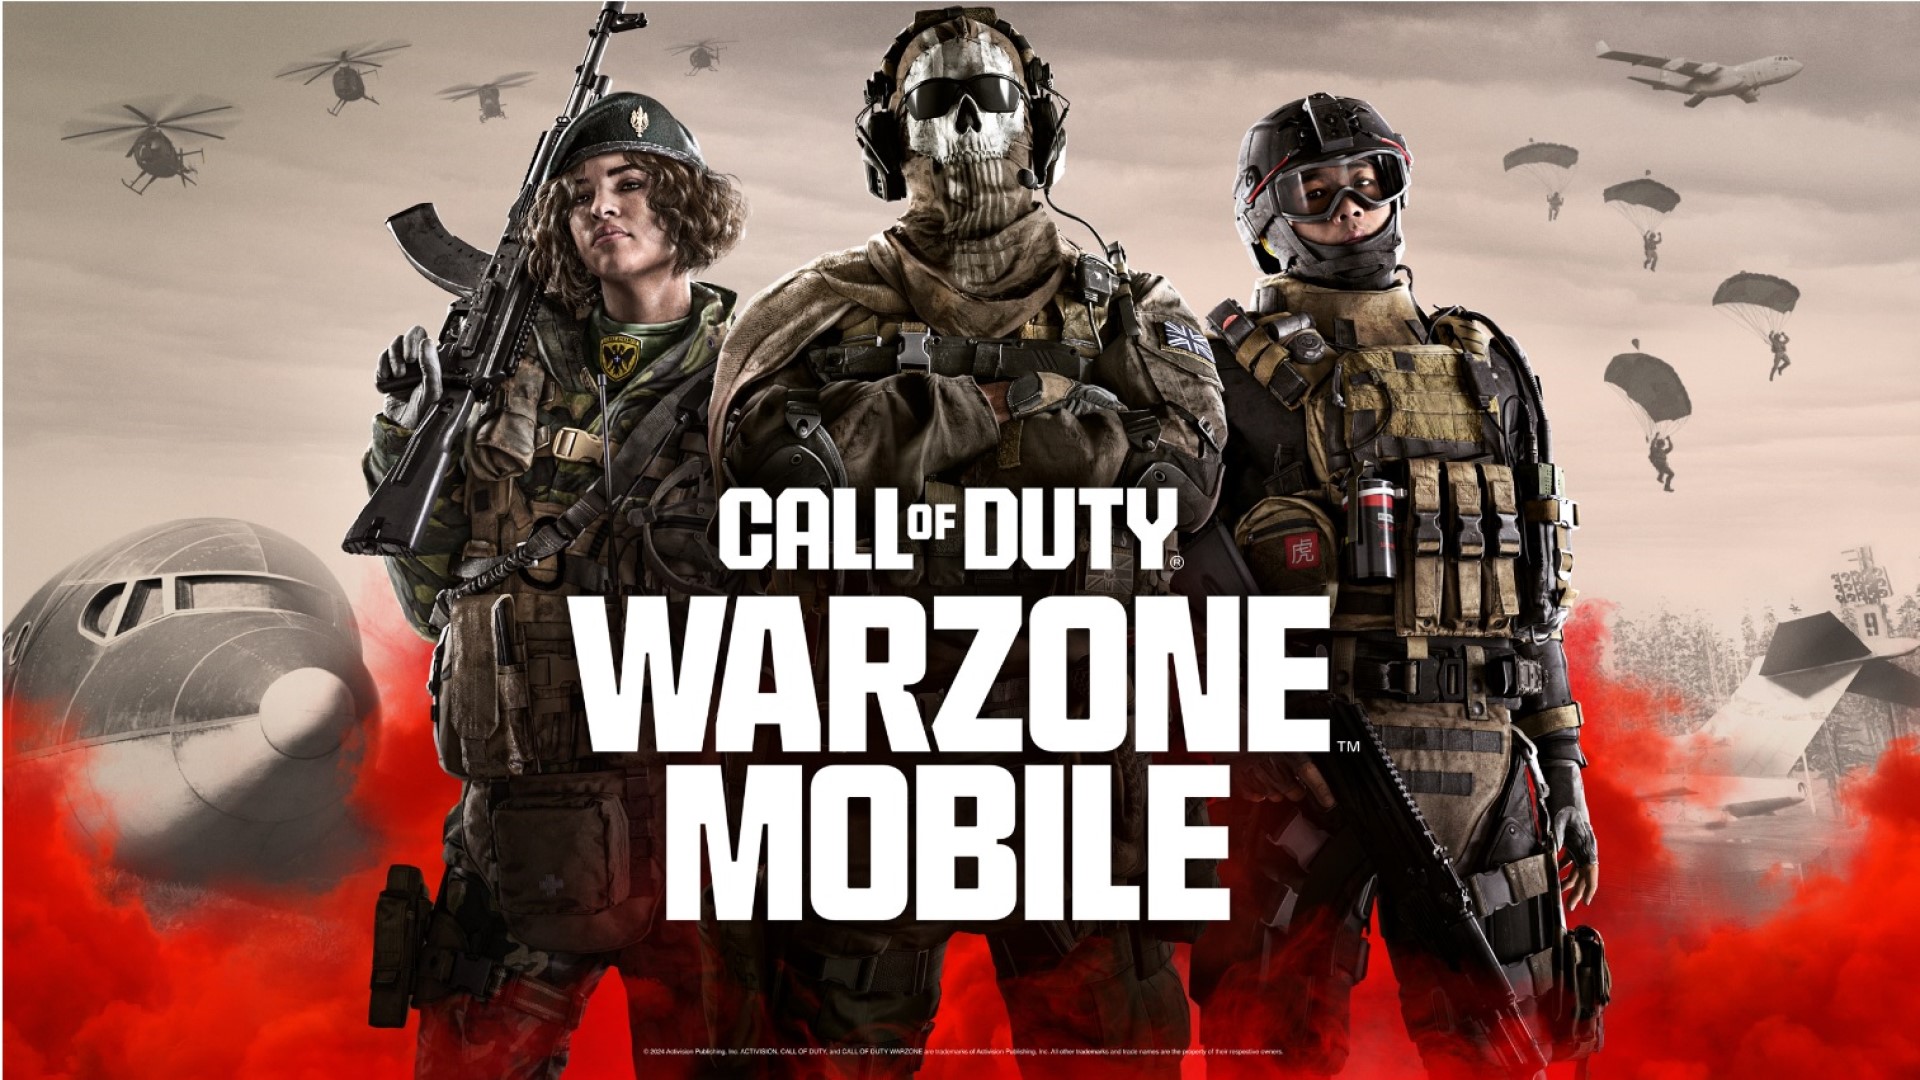 Call of Duty; Call of Duty Warzone Mobile